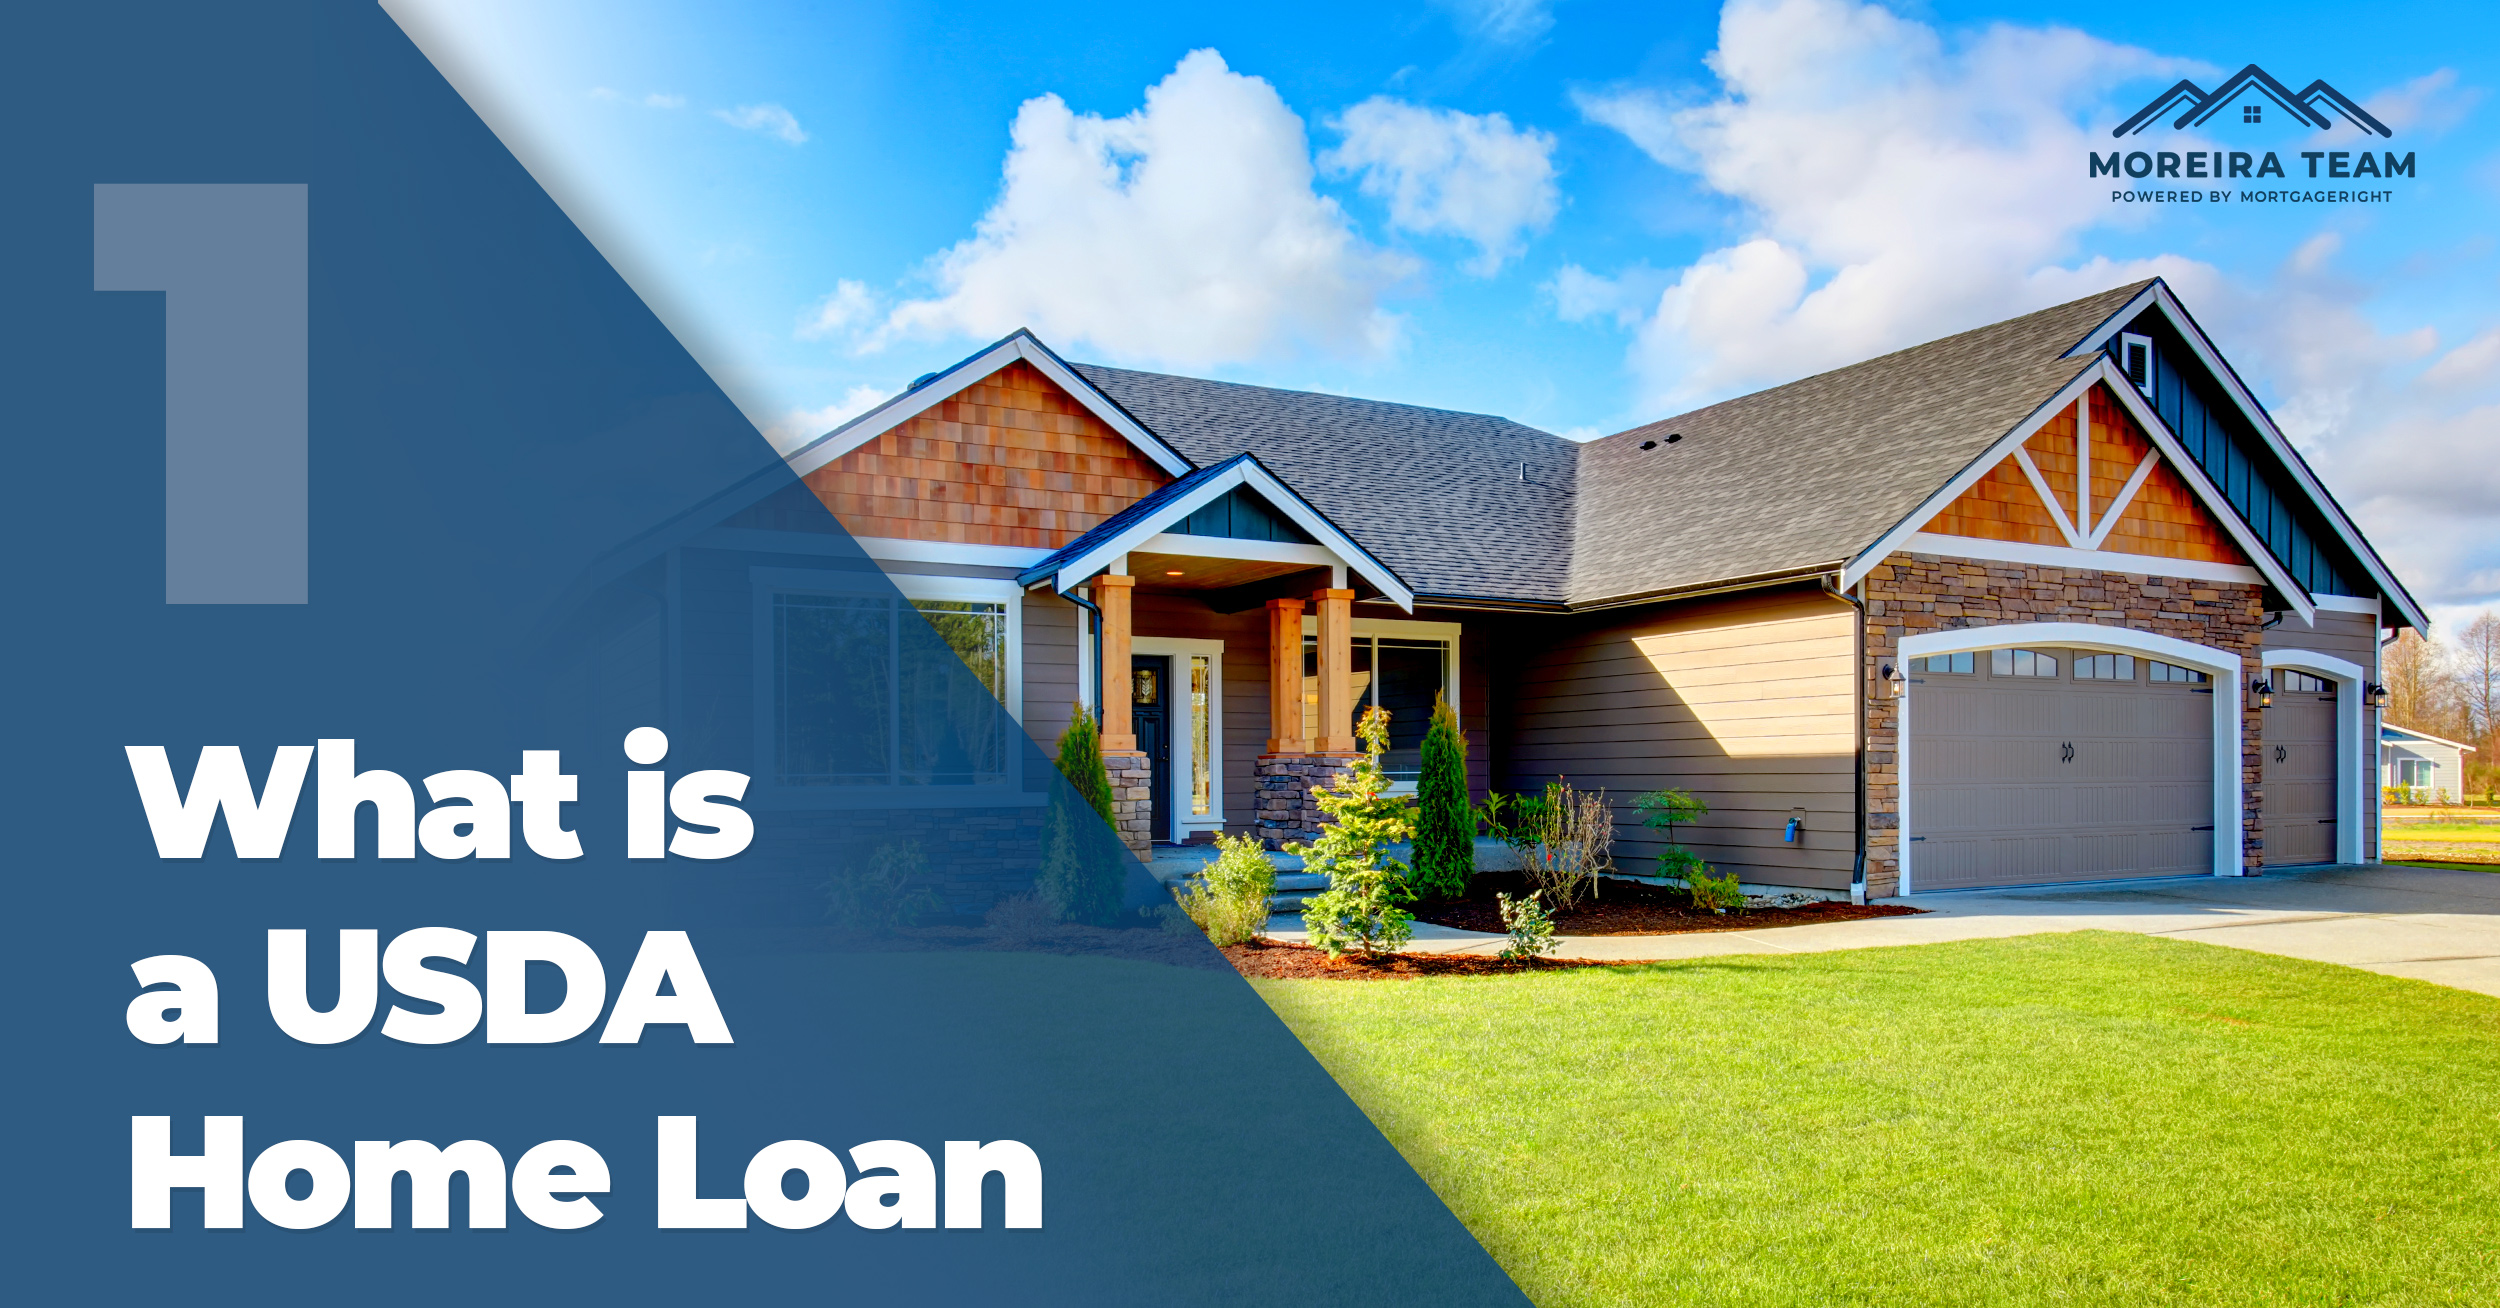 USDA Loans, Part 1: What is a USDA Home Loan?